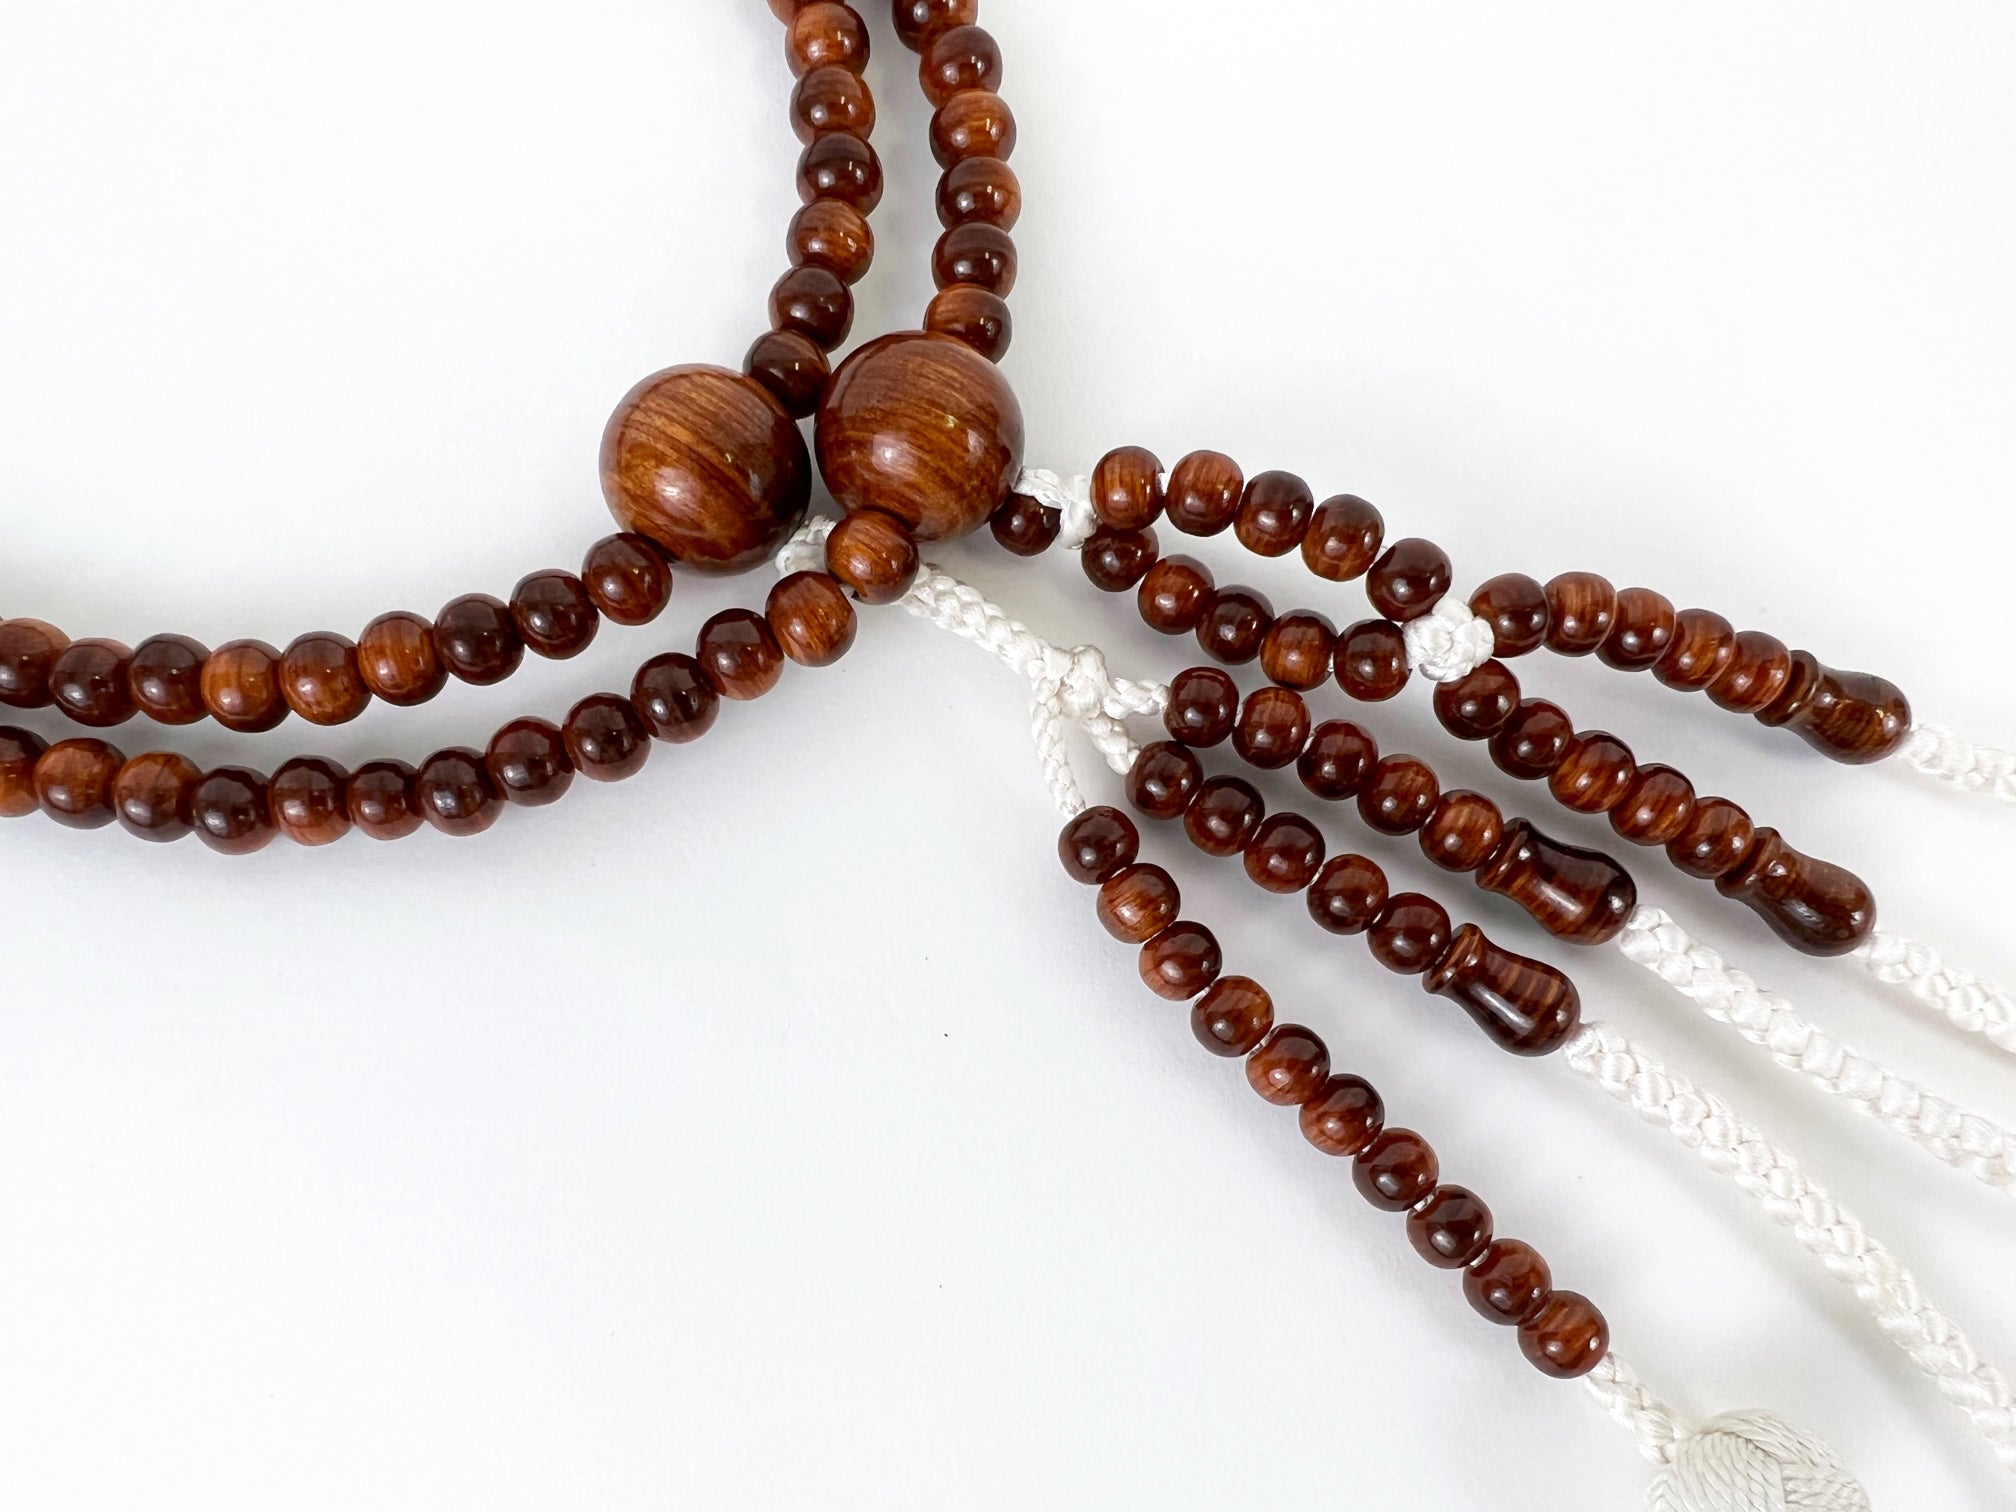 Tsuishu (Camphorwood) Beads with Knitted Tassels